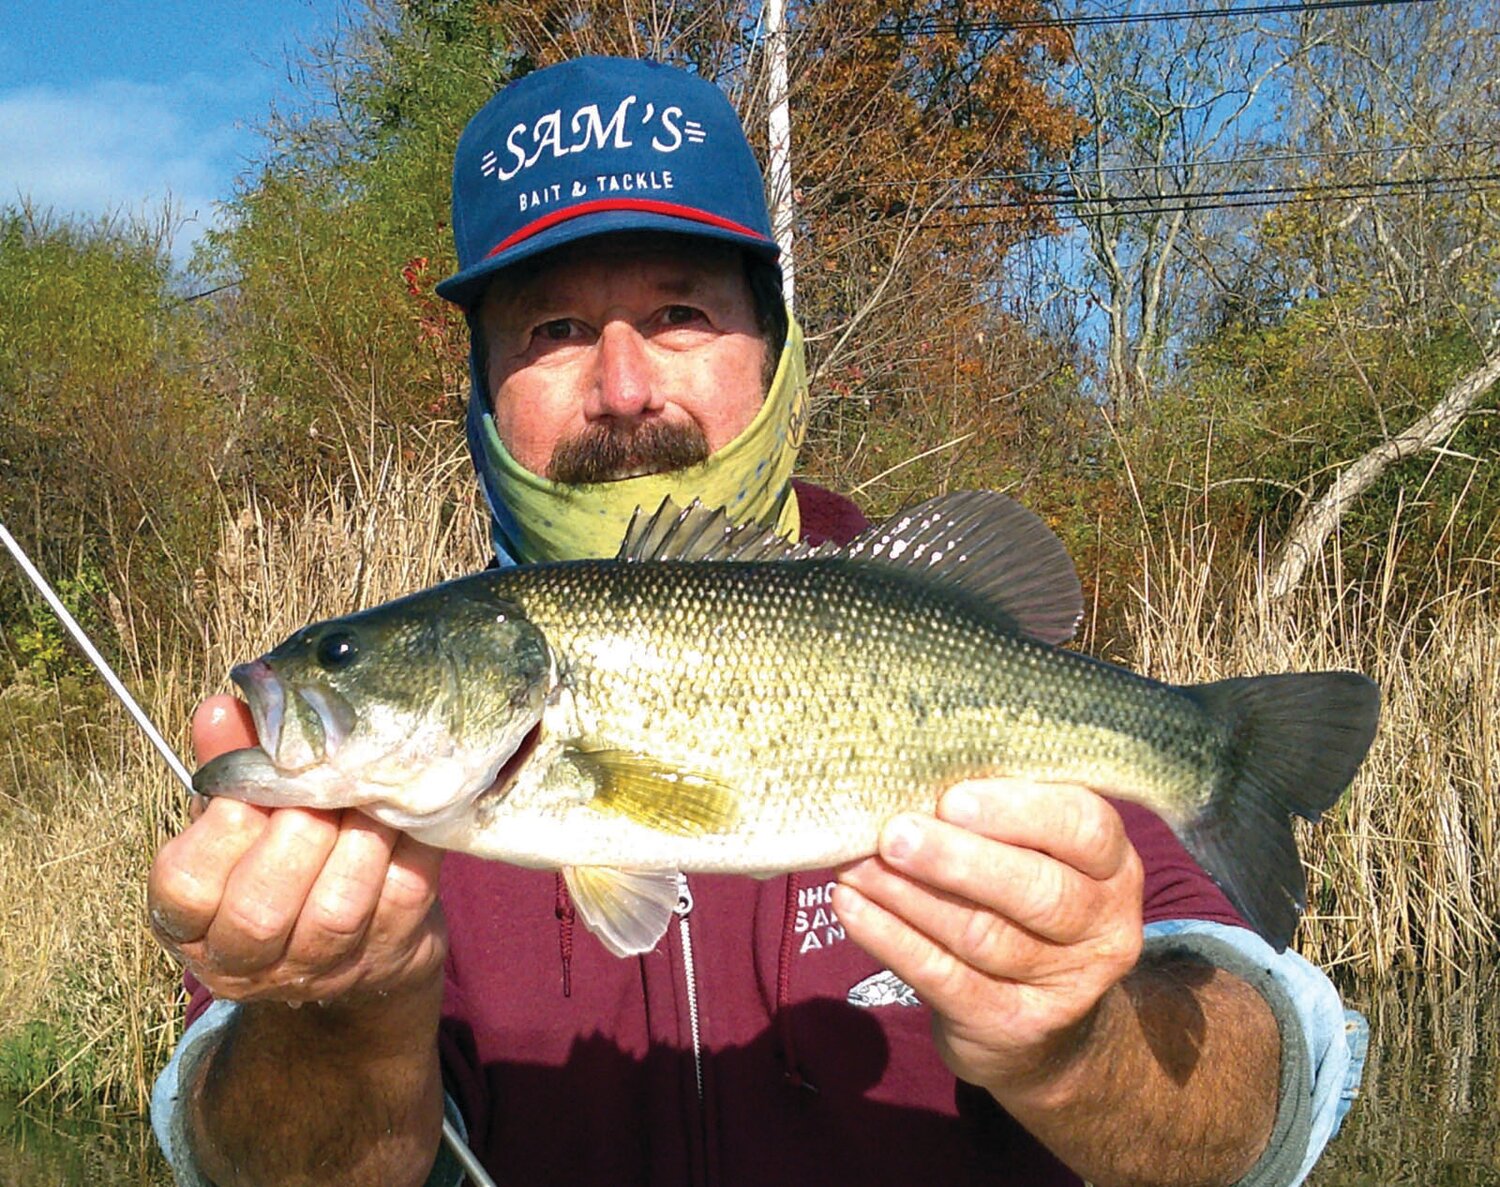 LARGEMOUTH BASS BITE: John Migliori with an Aquidneck Island largemouth bass said, “Sunday morning I caught this nice 17 inch largemouth using a Kastmaster lure.” (Submitted photos)